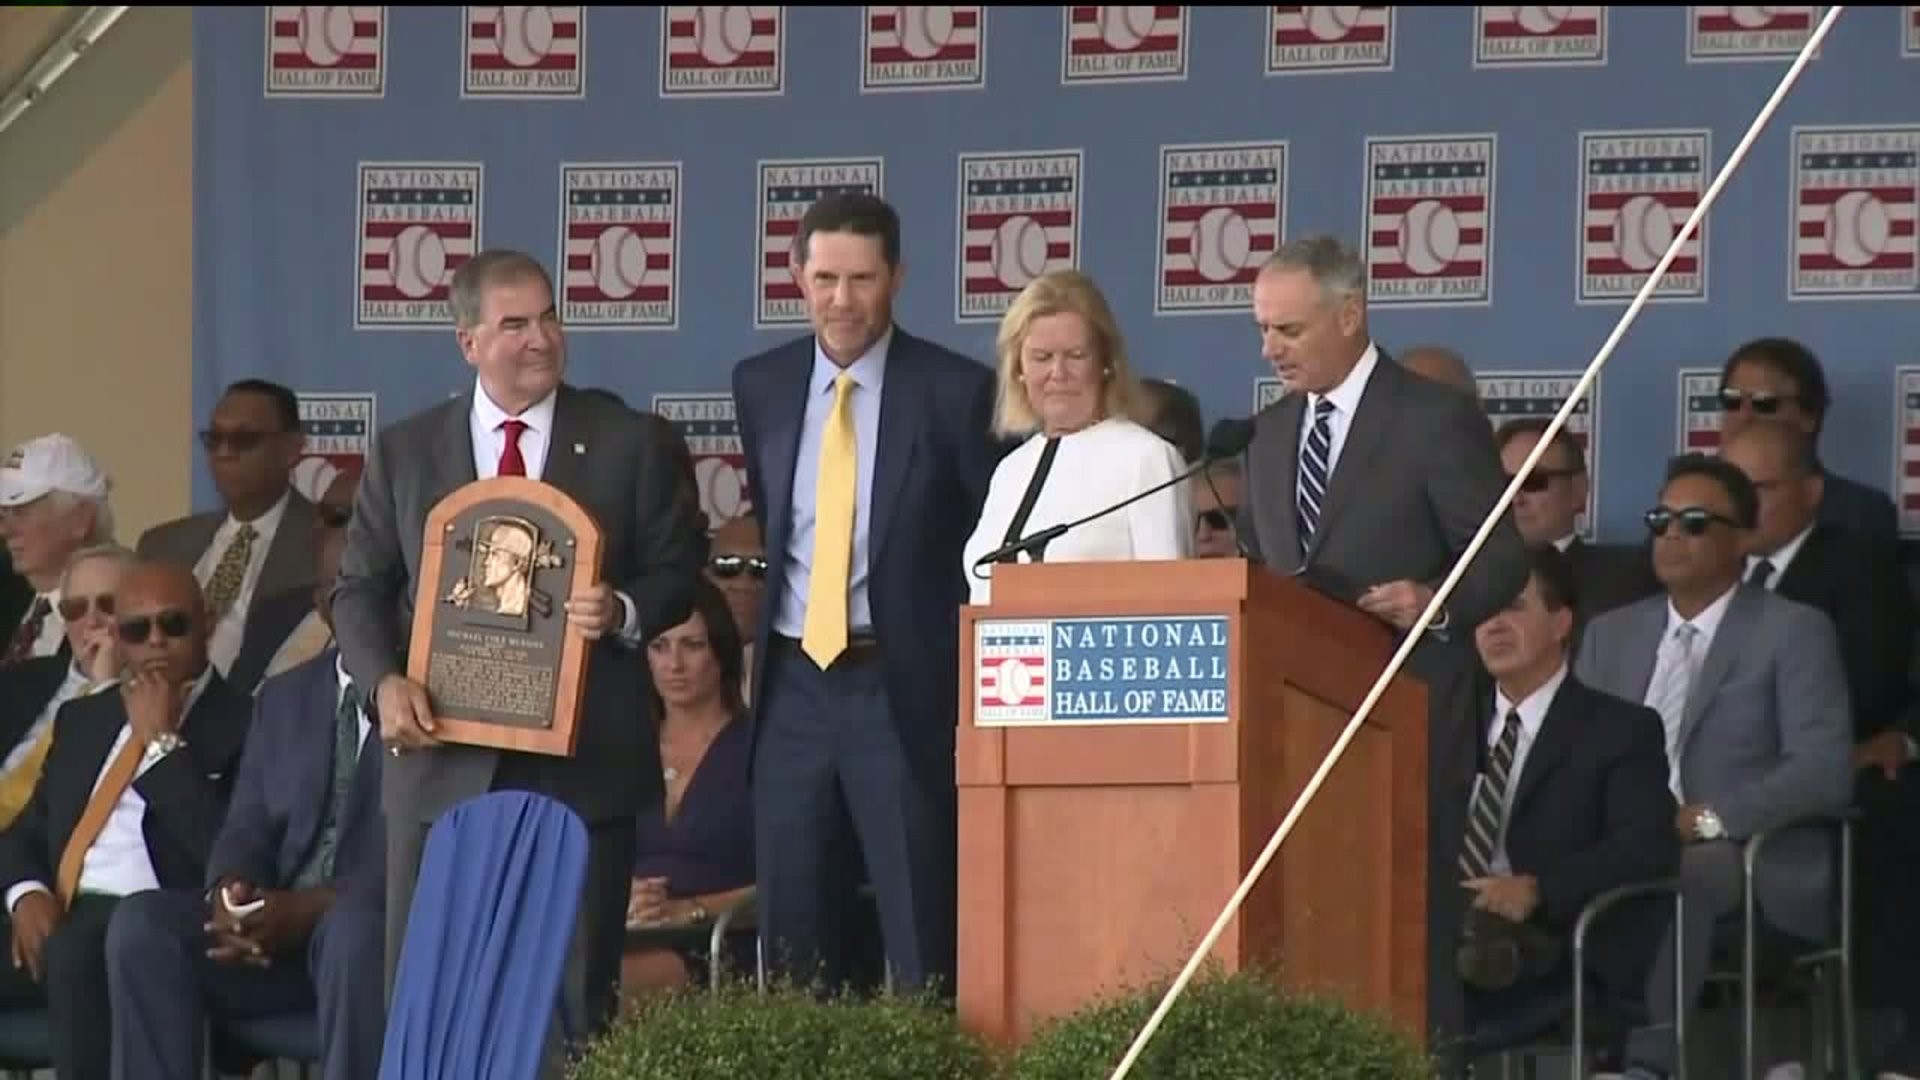 Mike Mussina Inducted Into Baseball Hall of Fame